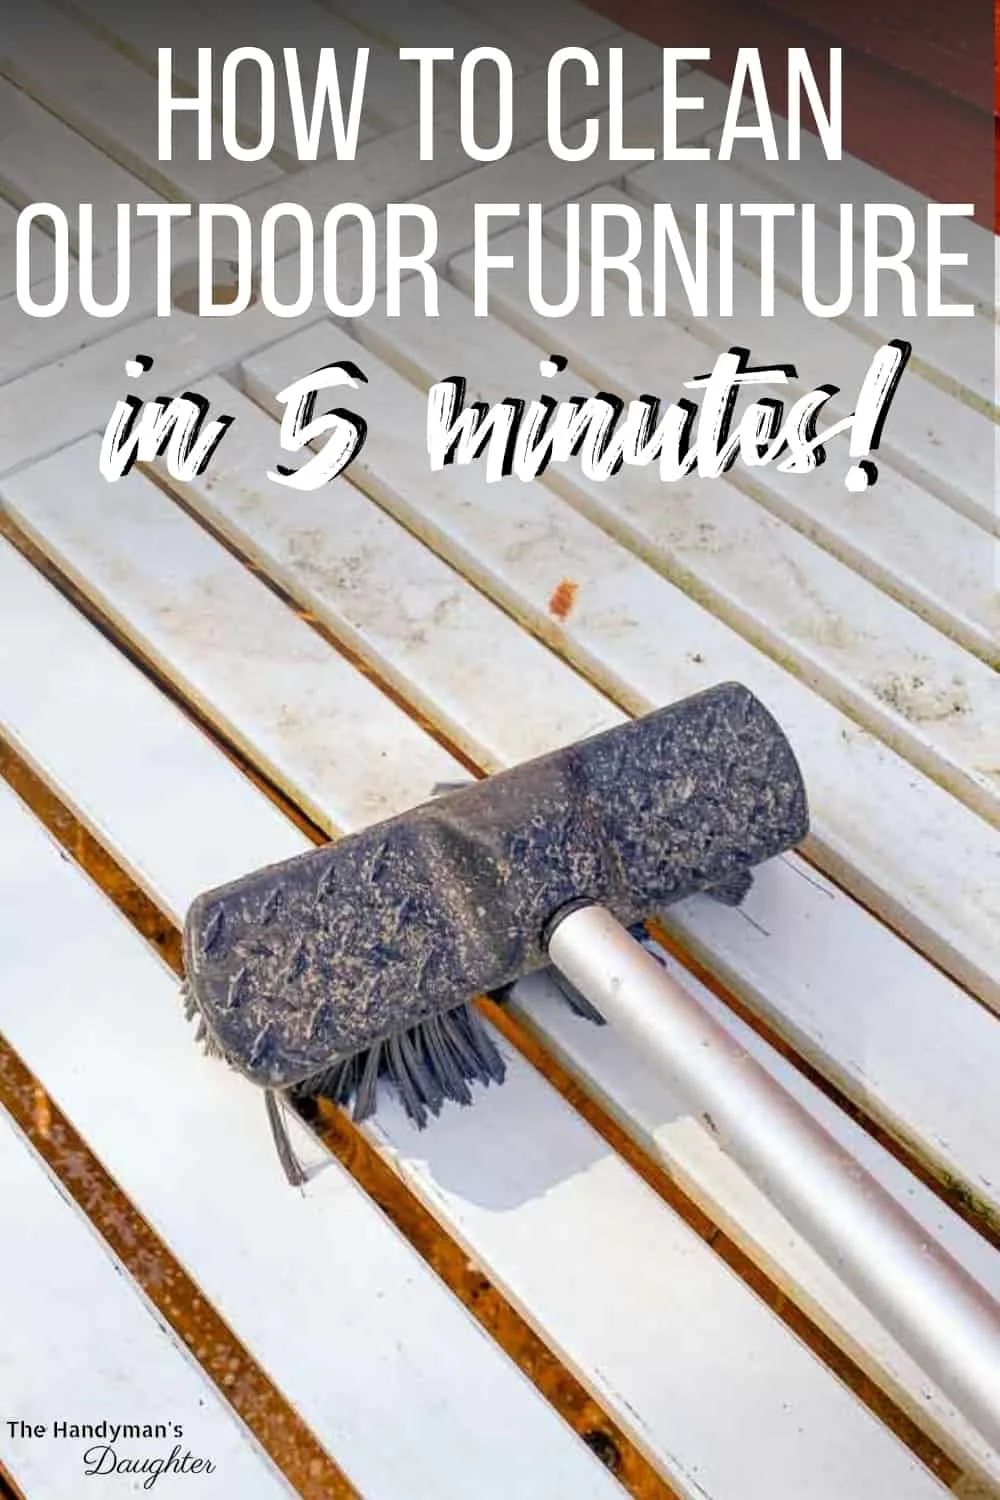 How to clean outdoor furniture in 5 minutes